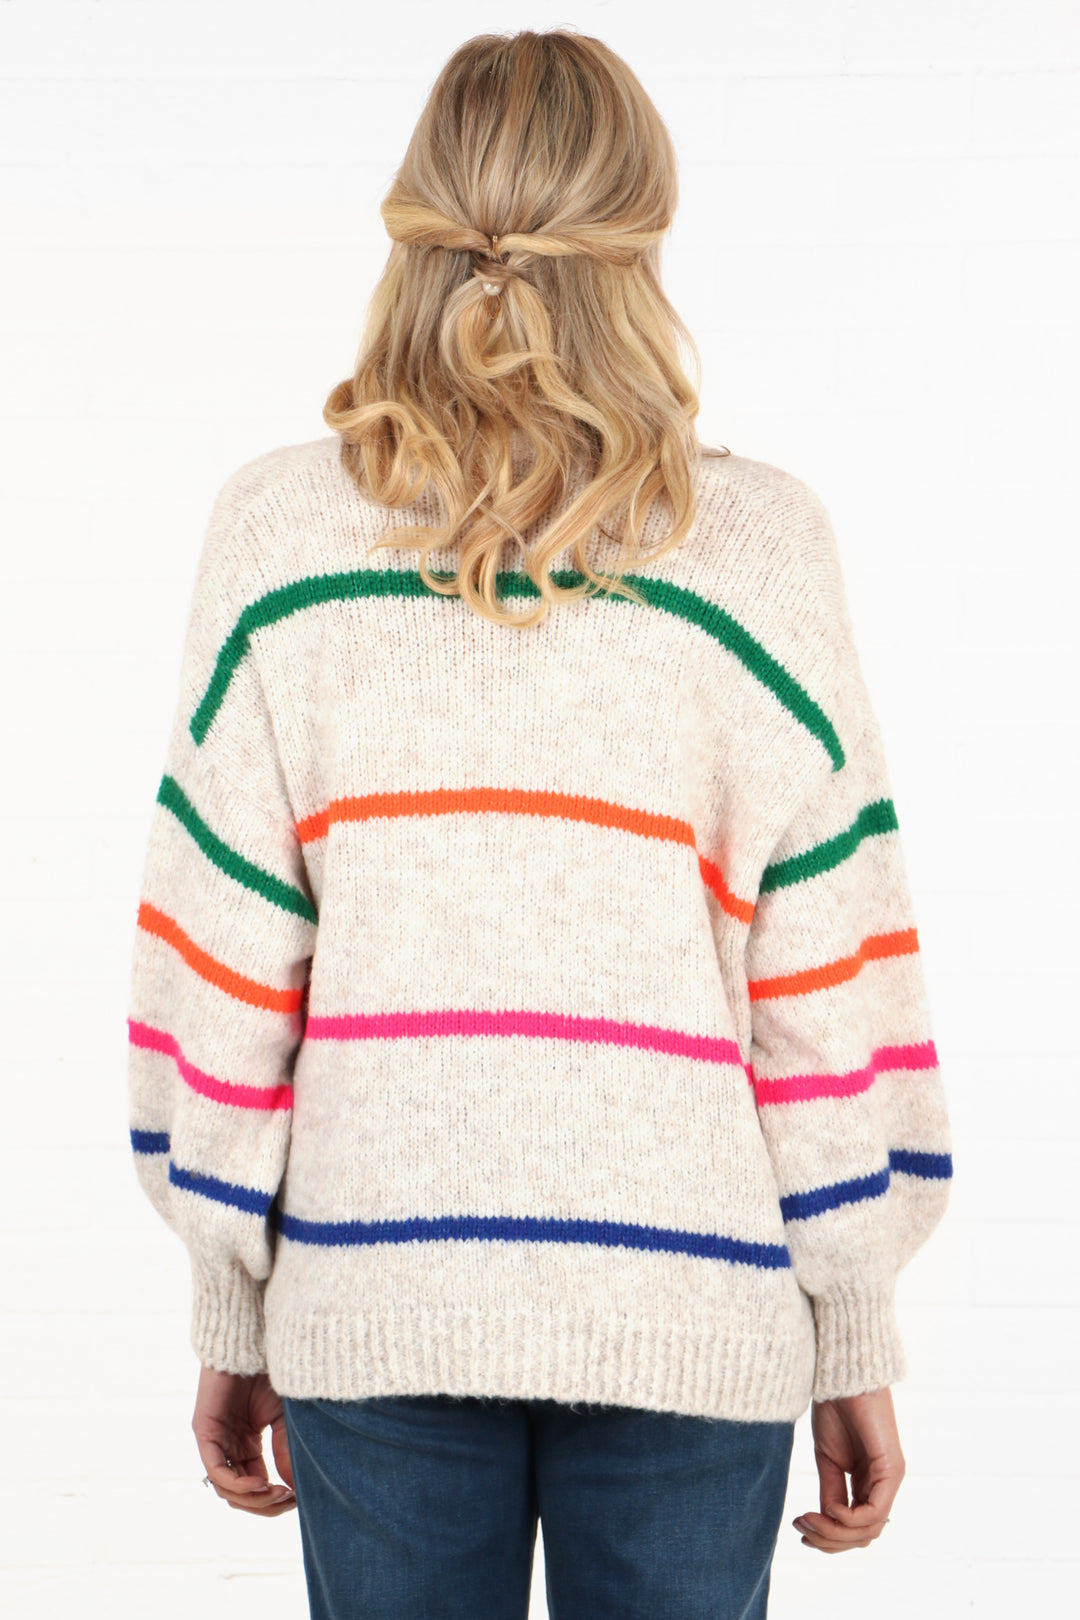 model showing the back of the cream cardigan showing the multicoloured stripes